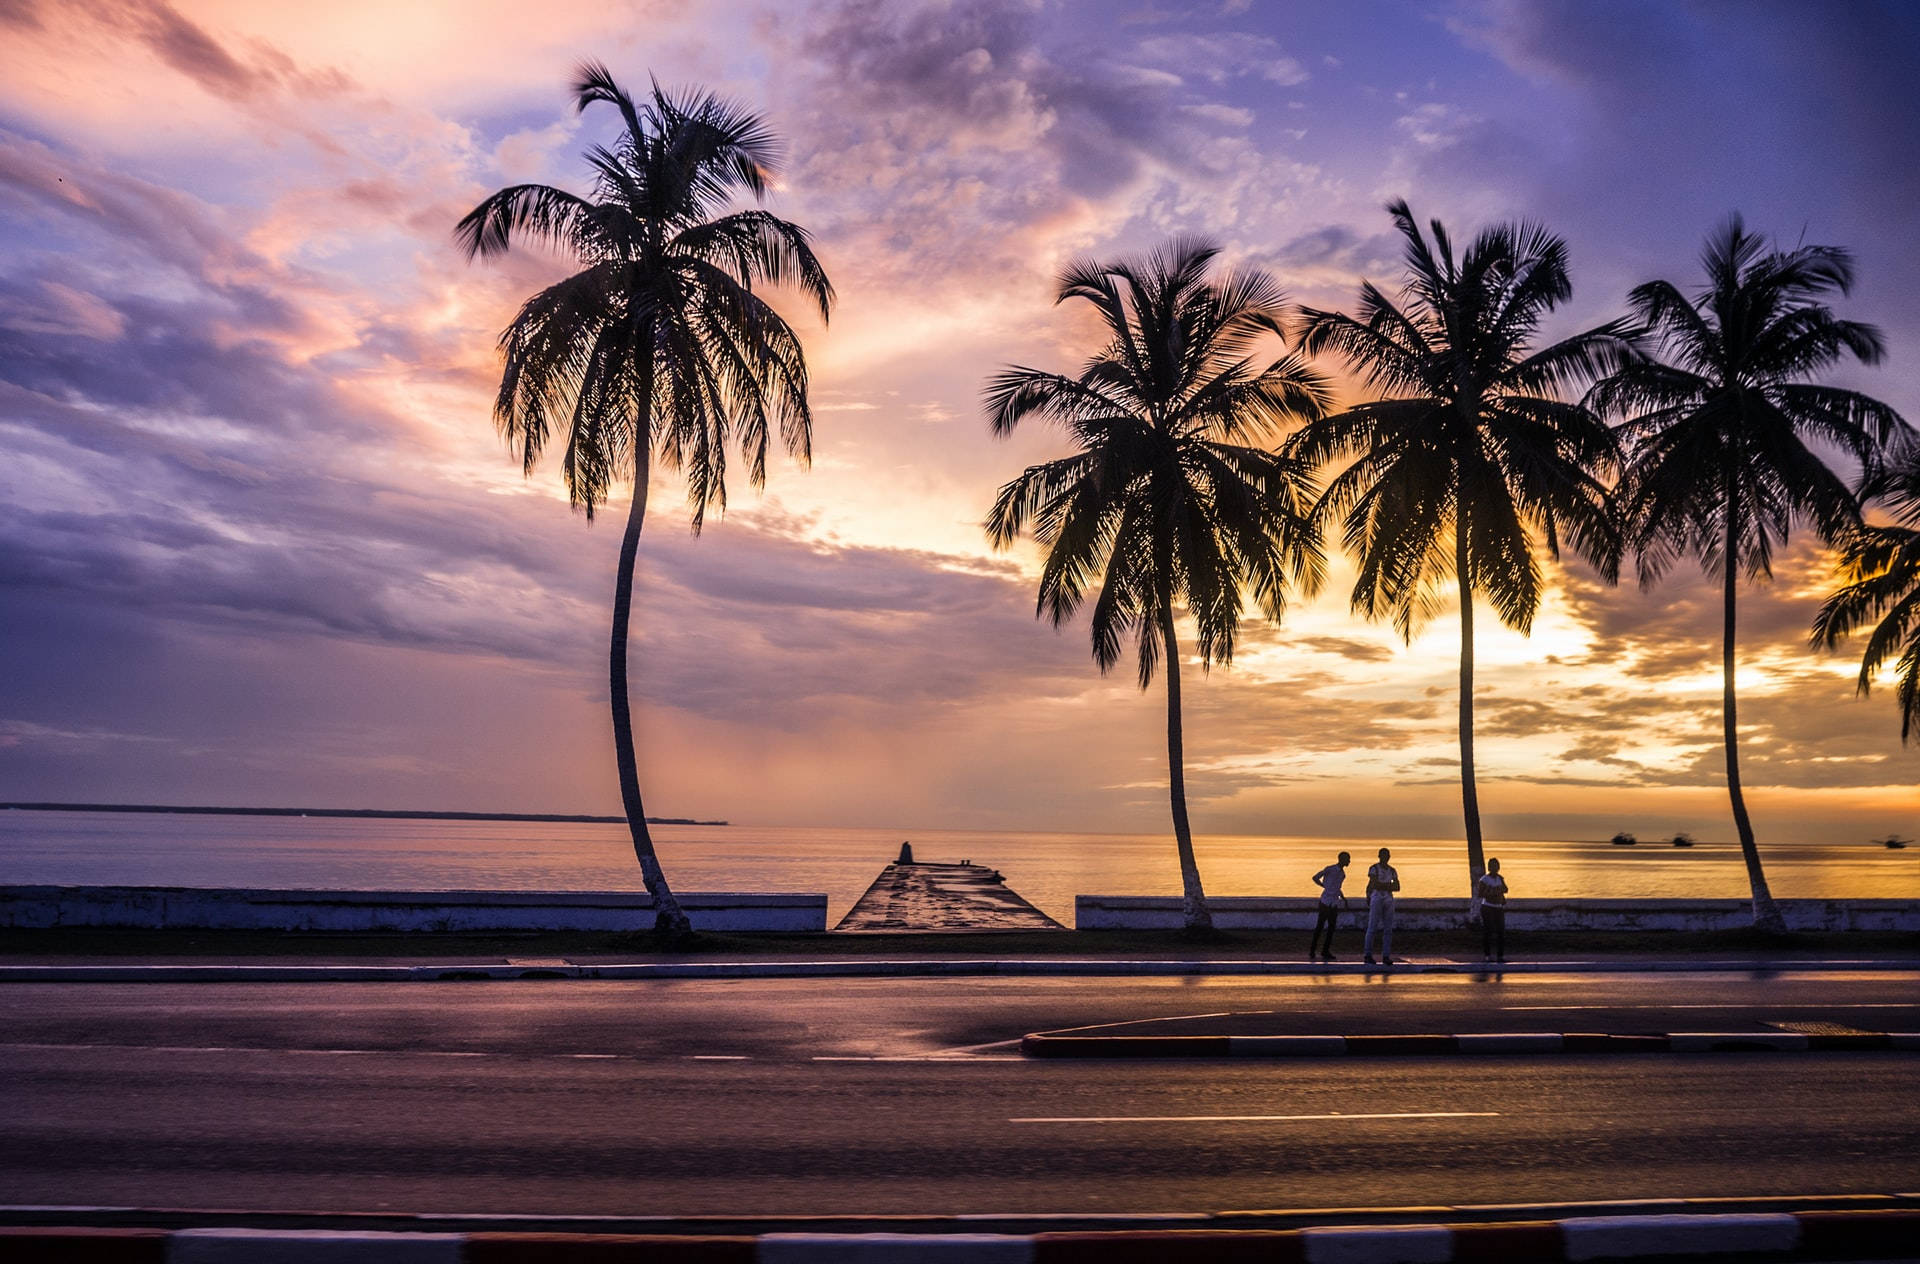 Sunset And Palm Trees In Gabon Wallpaper